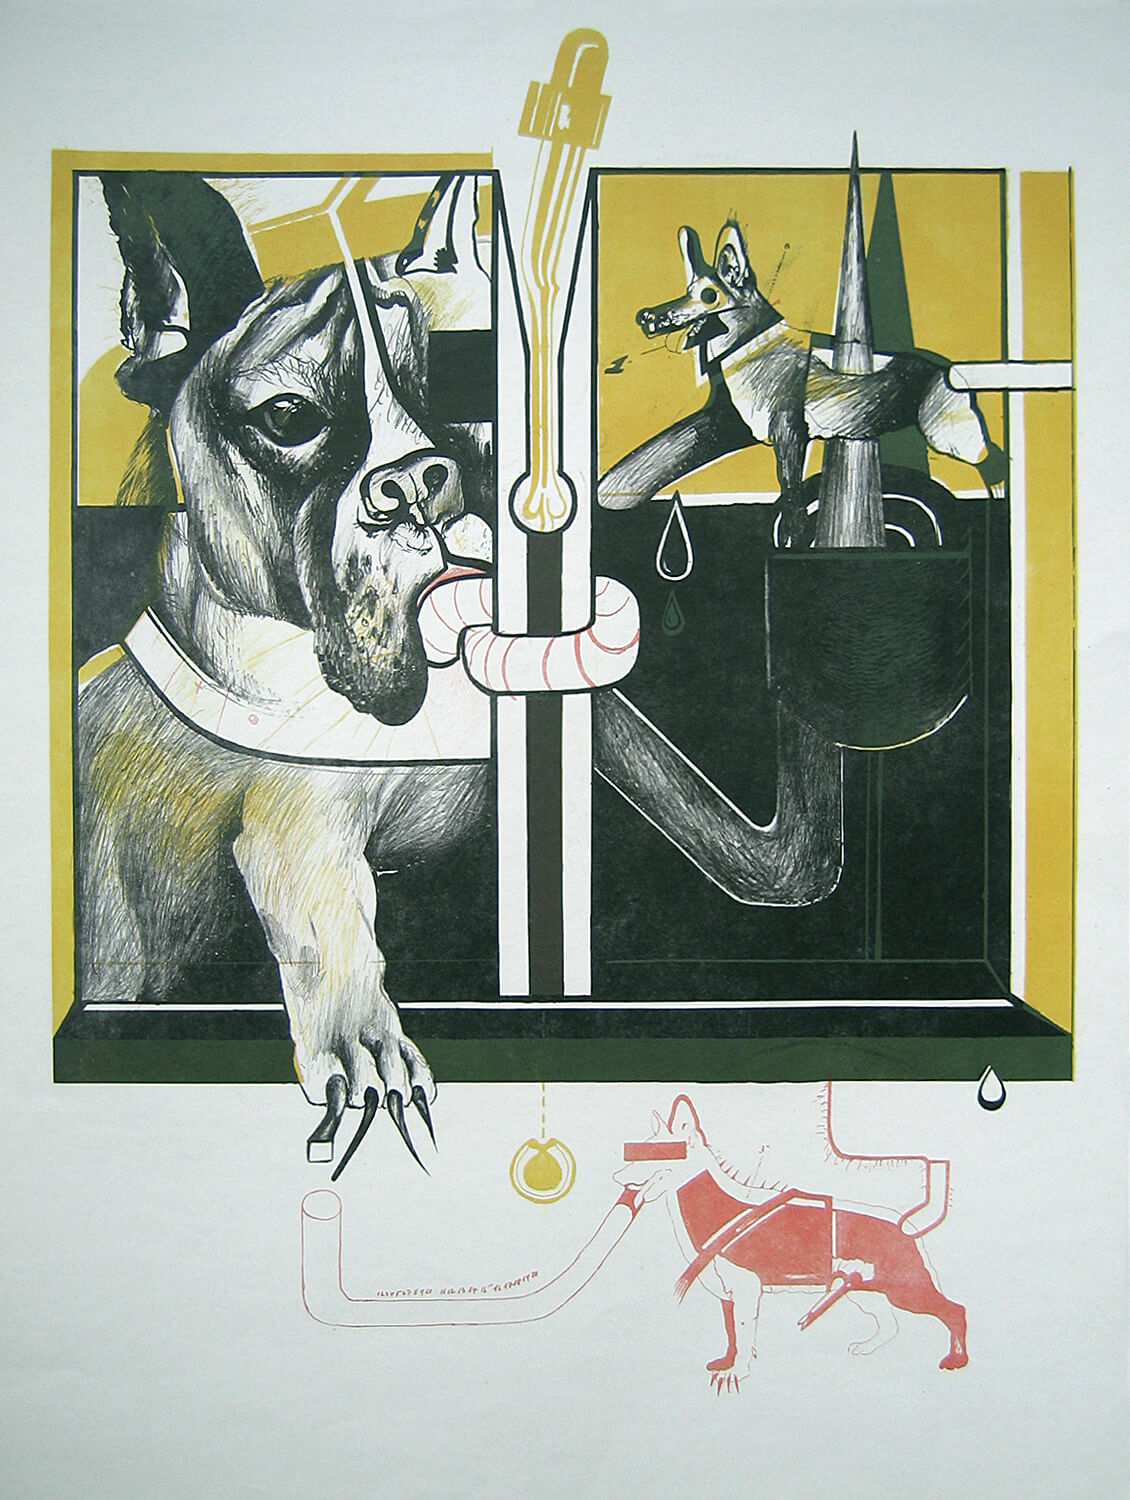 Wolfgang Petrick, o. T., 1969, Lithographie, Auflage: 30, 78,3 x 57,4 cm